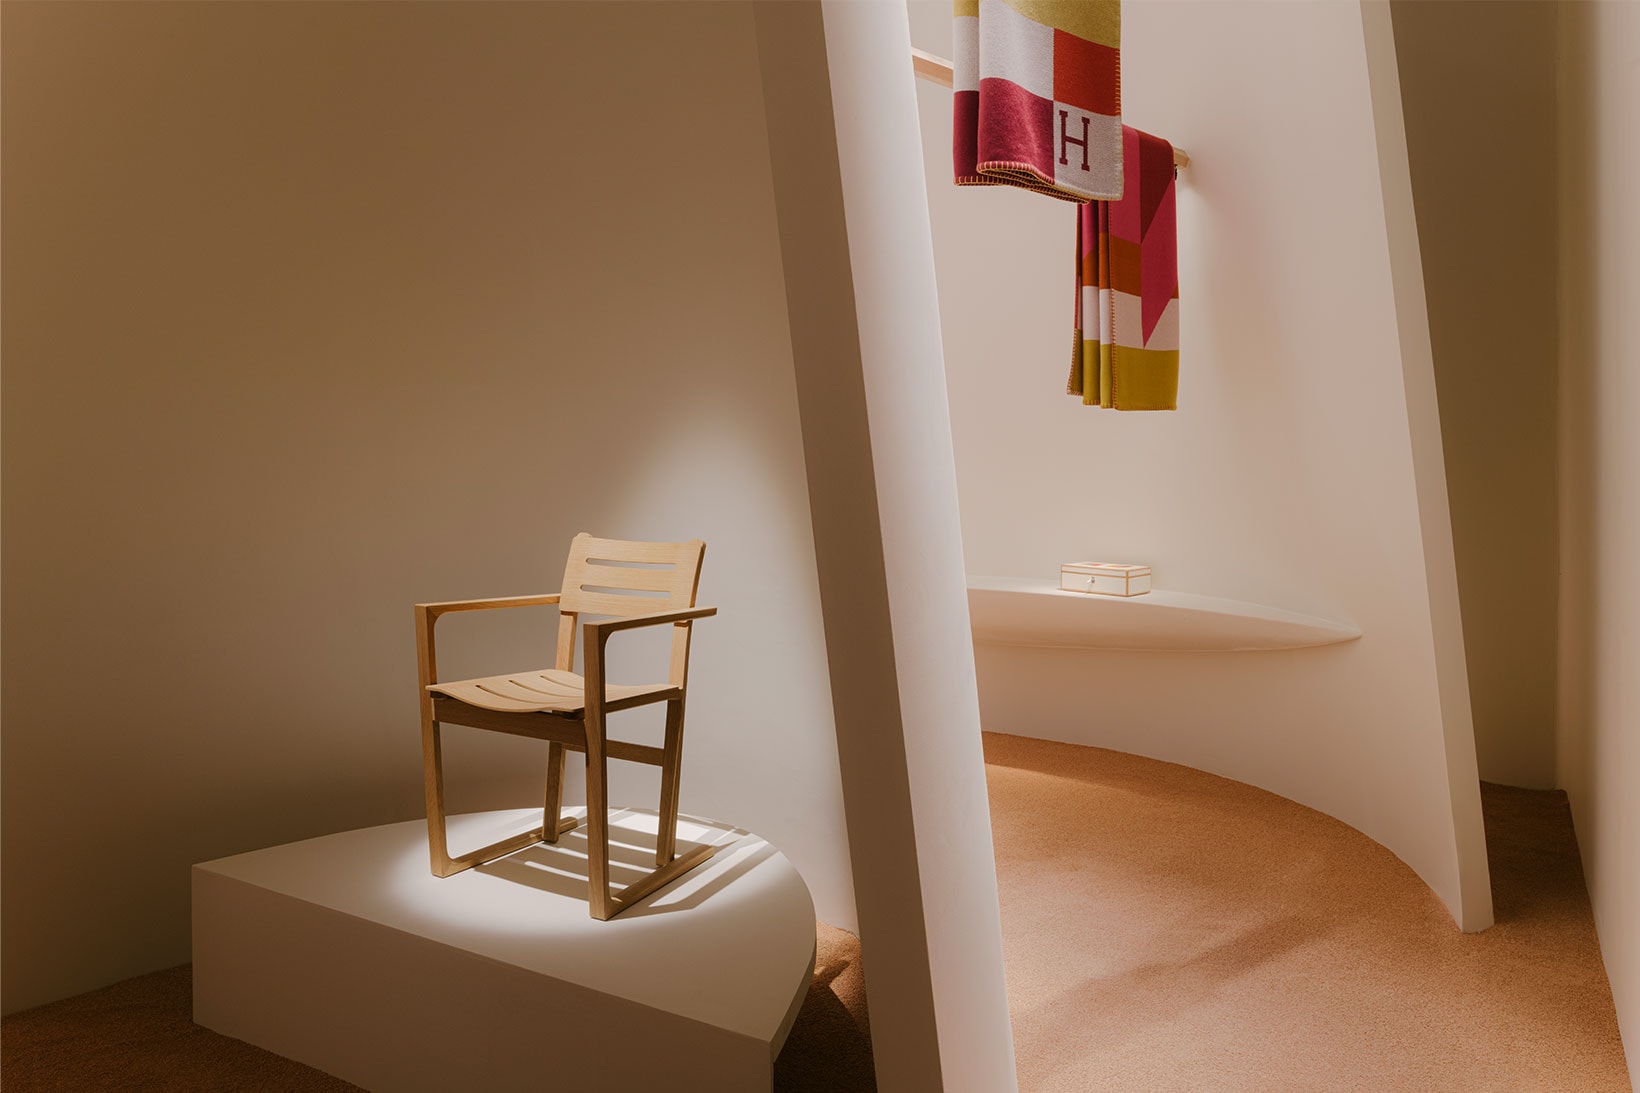 Hermés "Collection for the Home 2021-2022" wooden chair and plaids